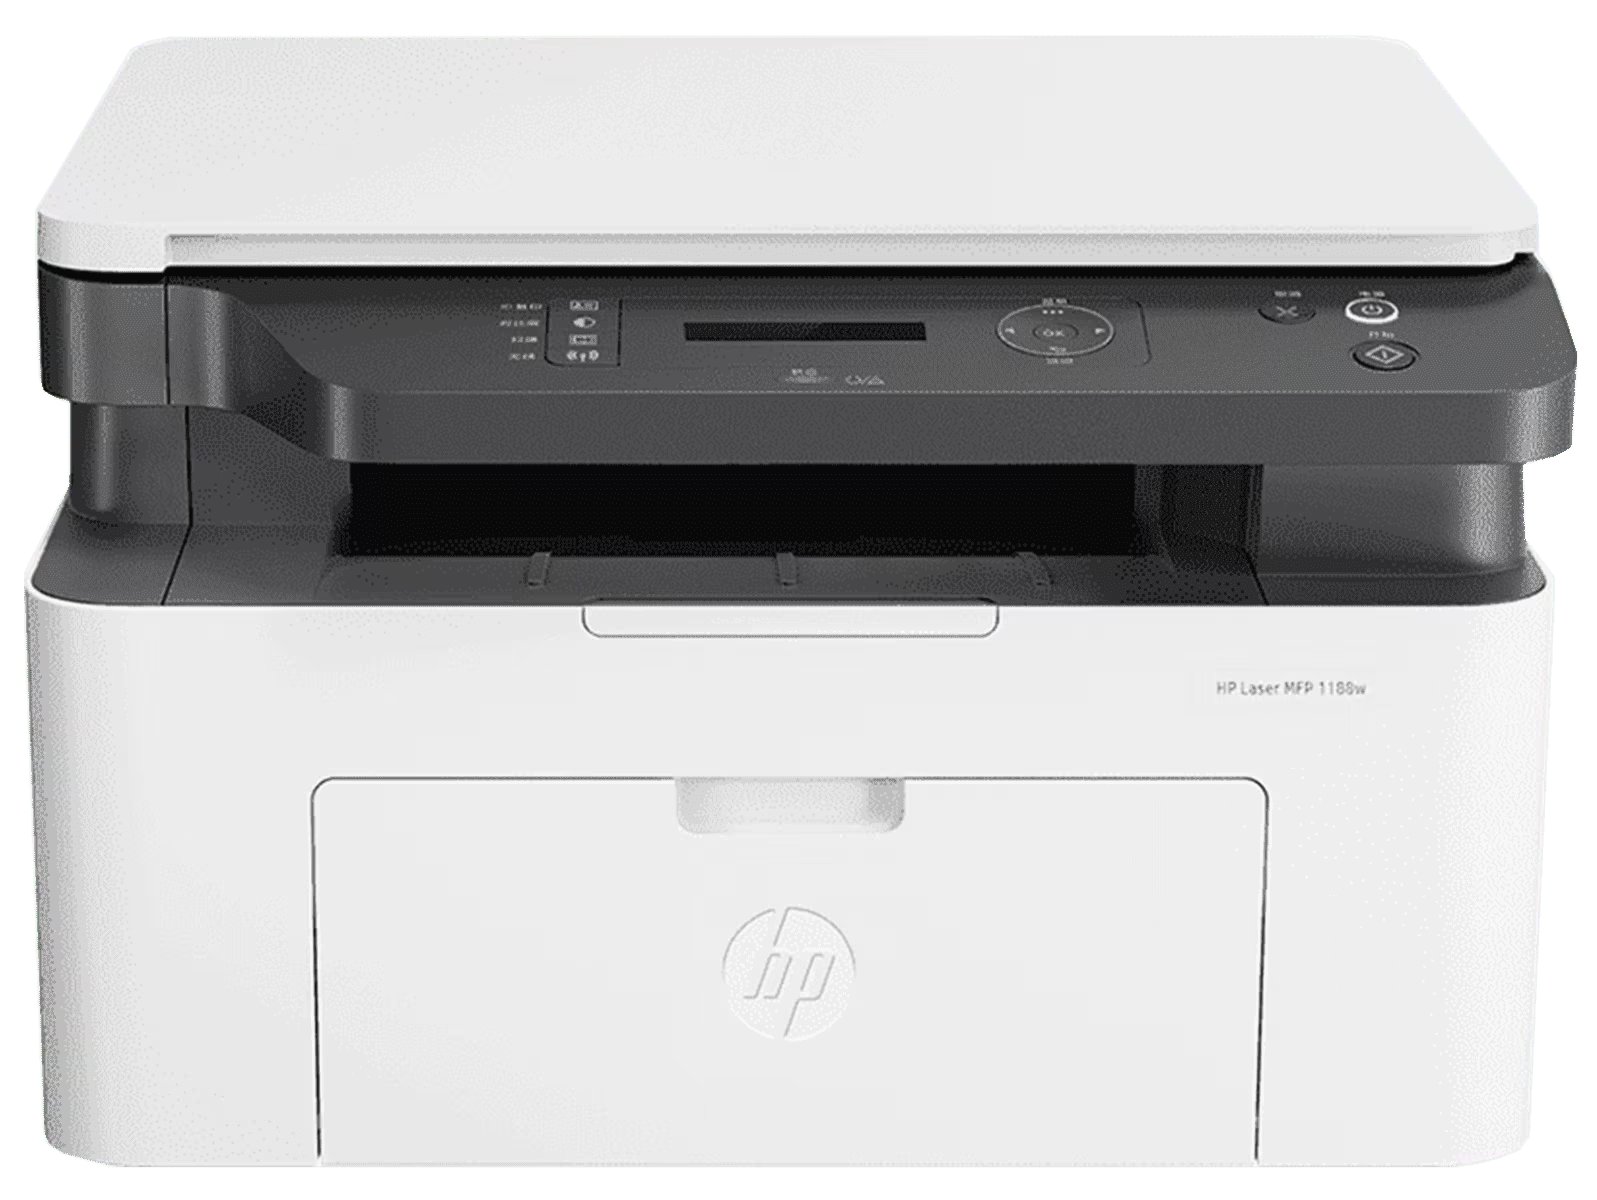 HP Laser MFP 1188w Printer 715A3A Laser Printer Up to 150 sheets Print, Copy & Scan - Black and white